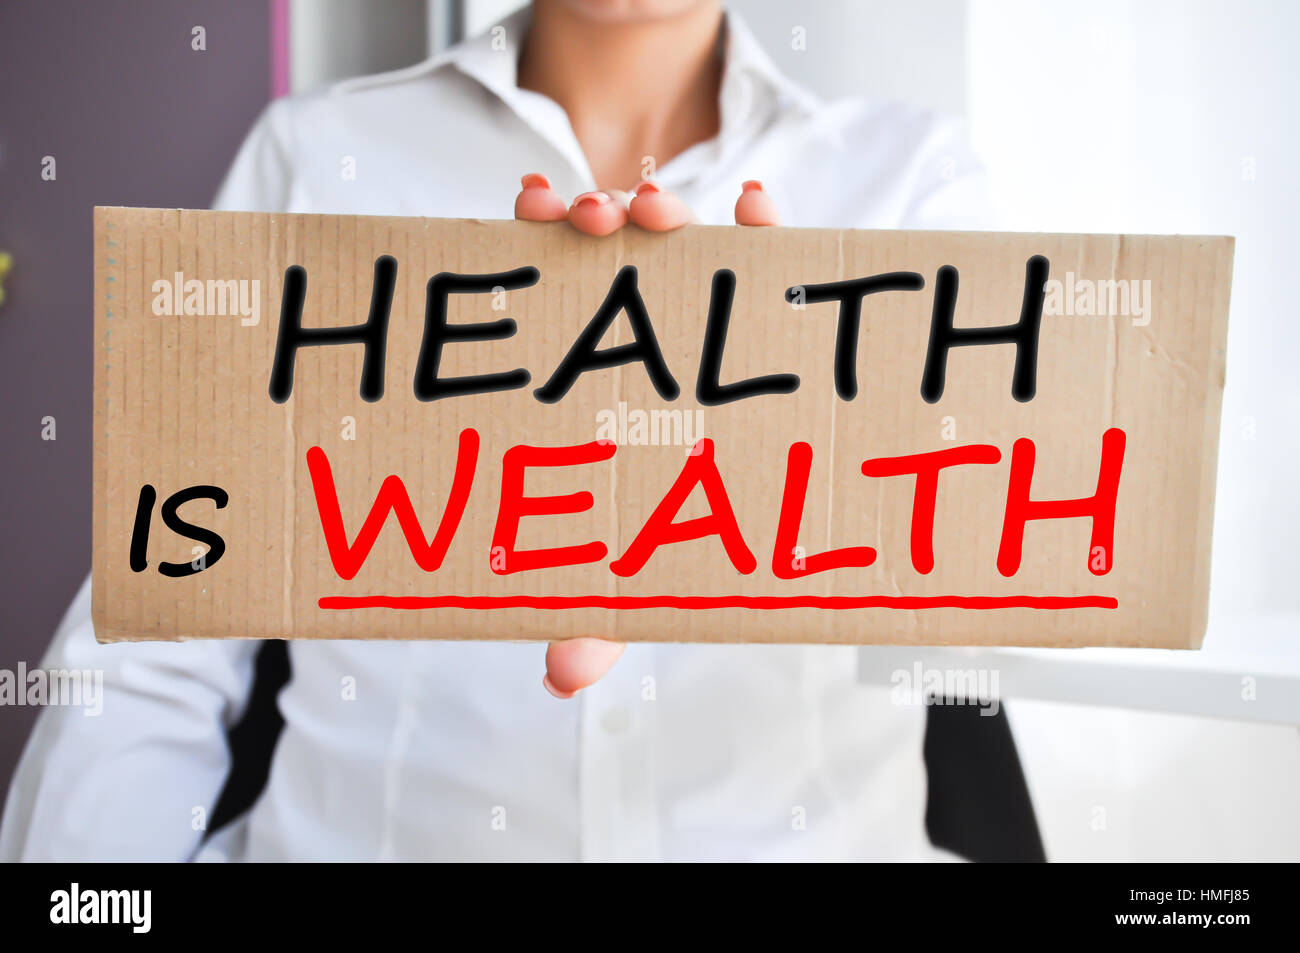 Health is wealth saying written on a cardboard sign held by a woman Stock Photo